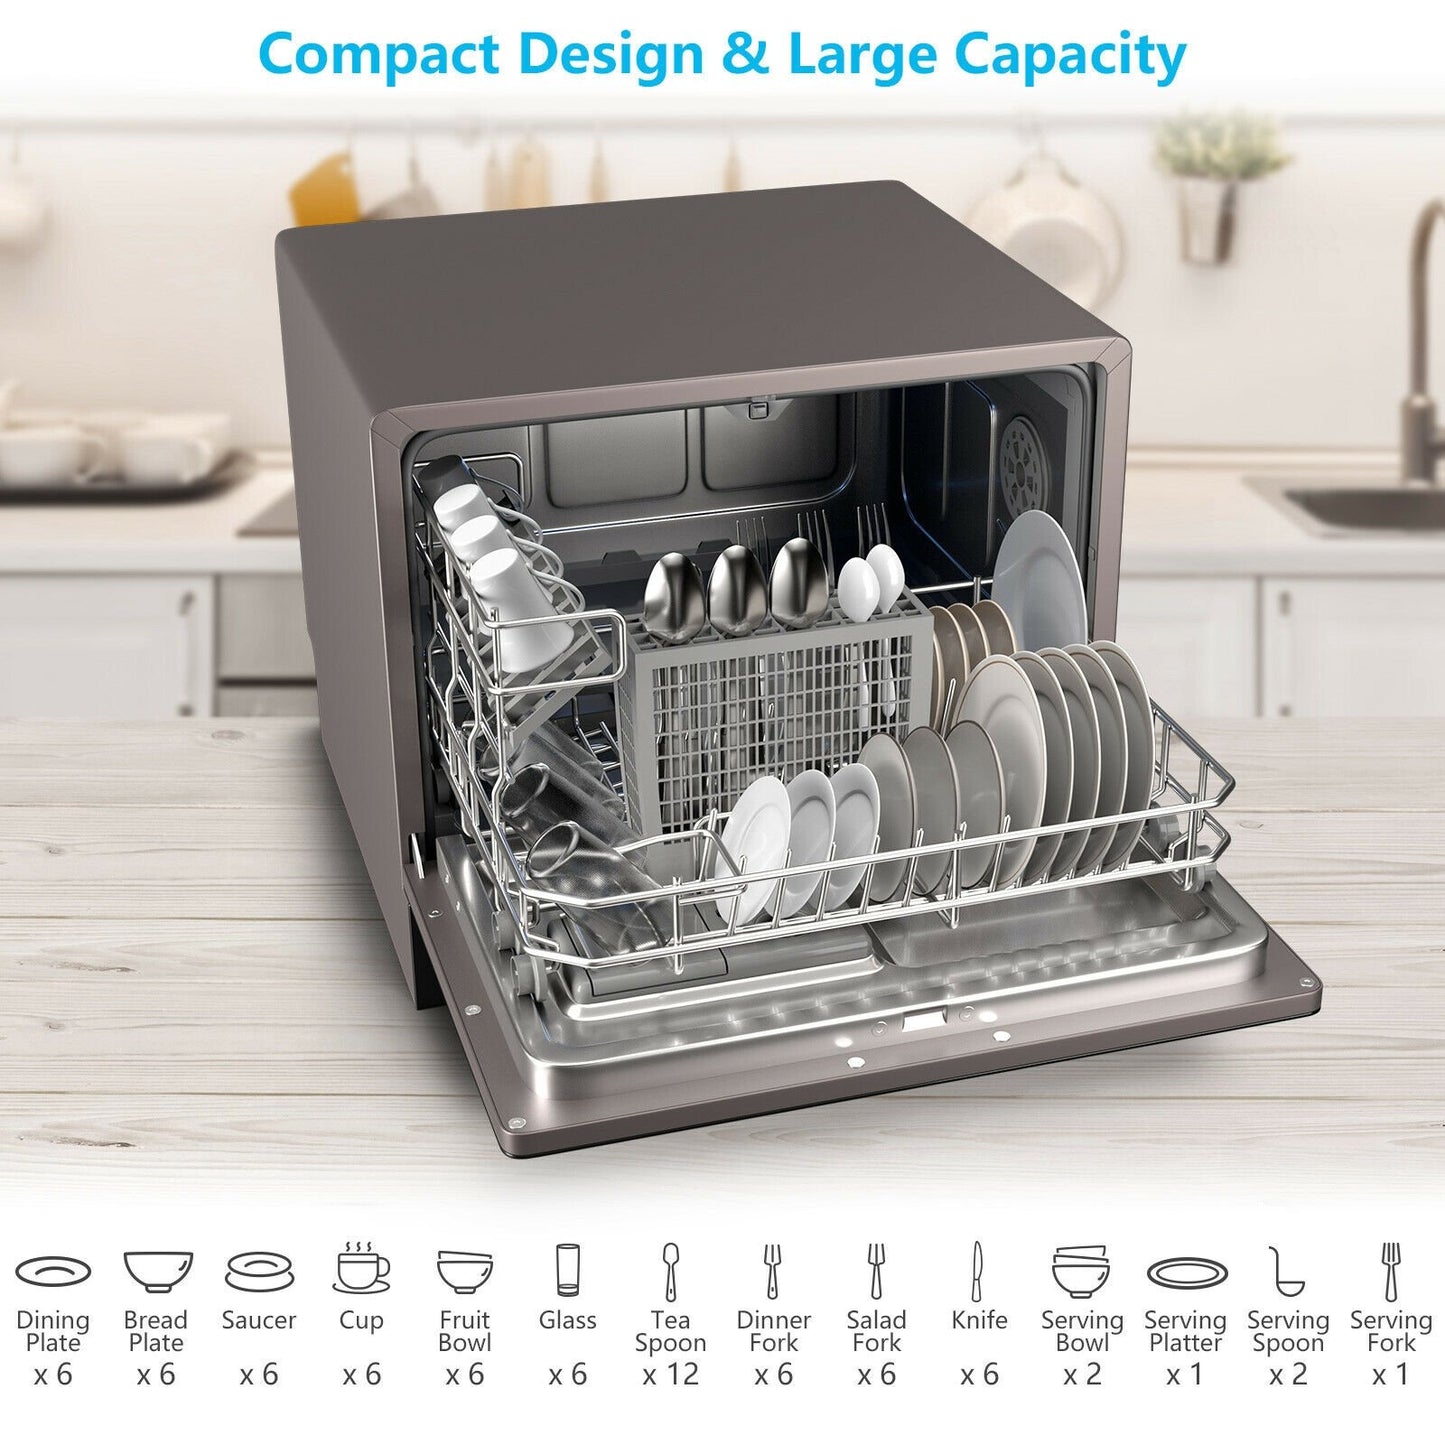 6 Place Setting Countertop or Built-in Dishwasher Machine with 5 Programs, Black